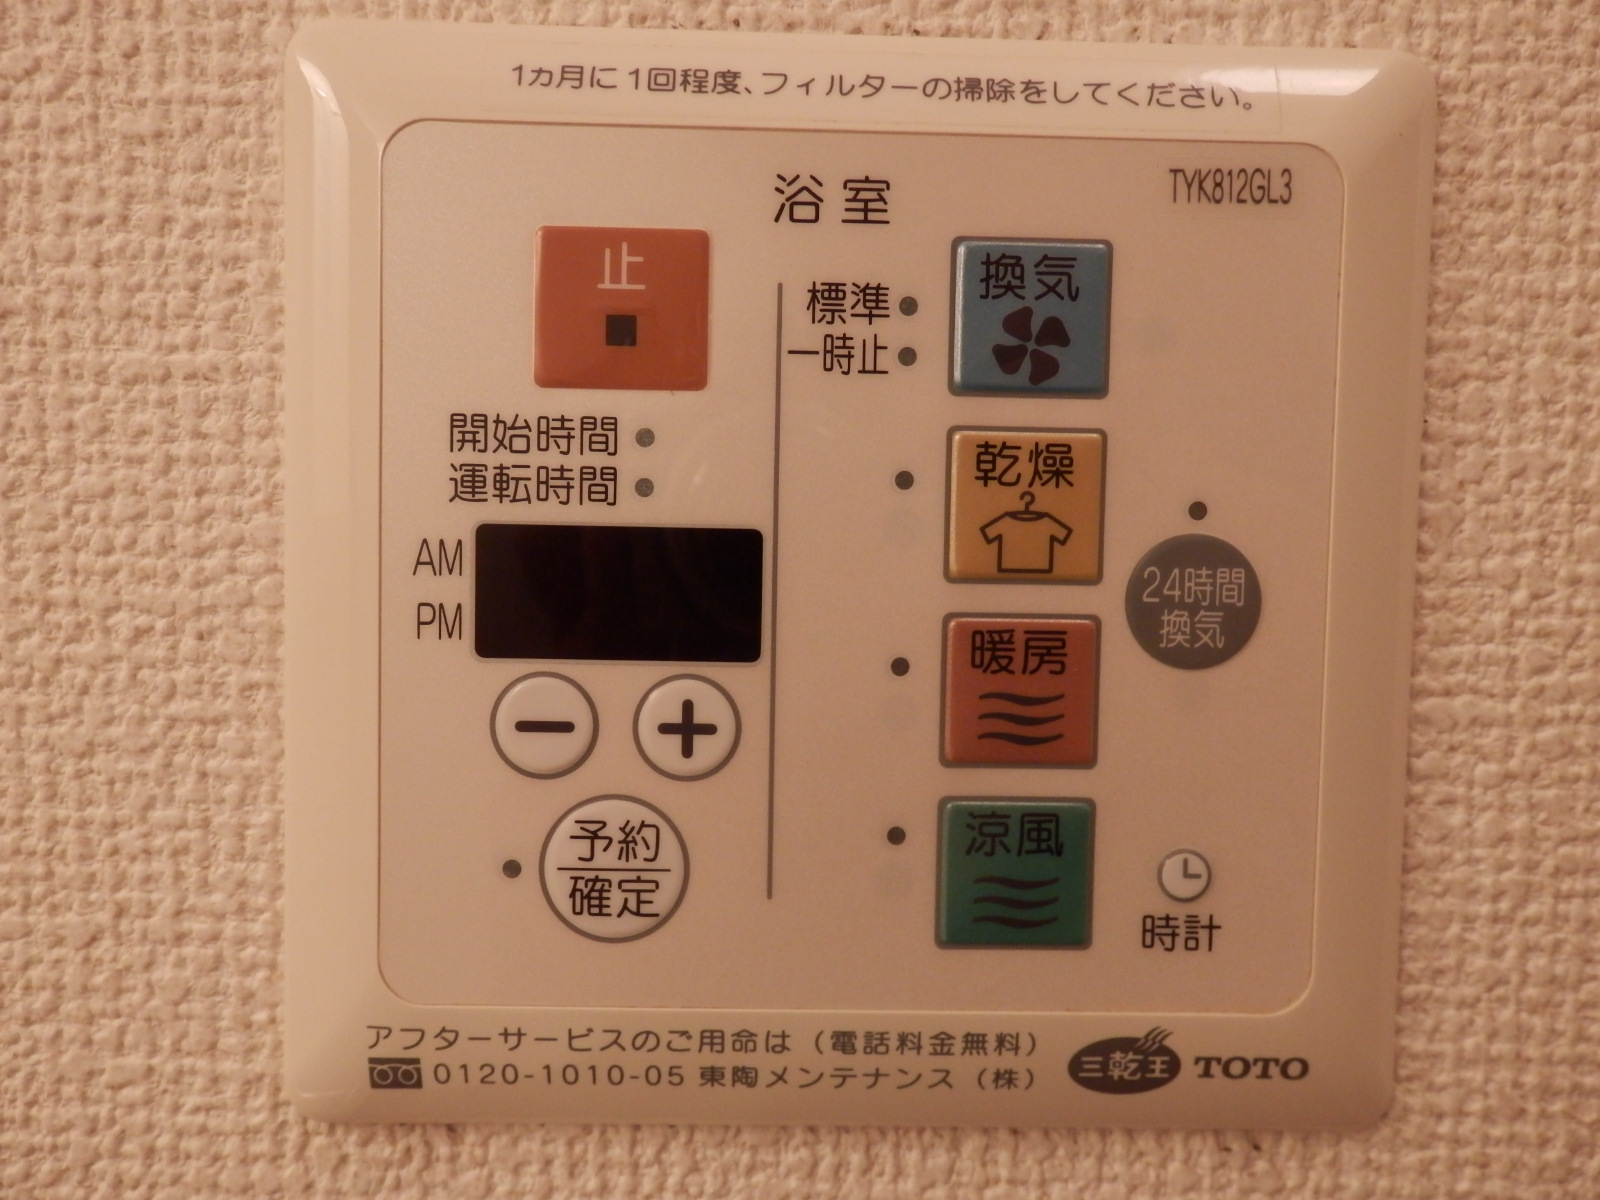 Other Equipment. With bathroom ventilation dryer, You can dry the bathroom ☆